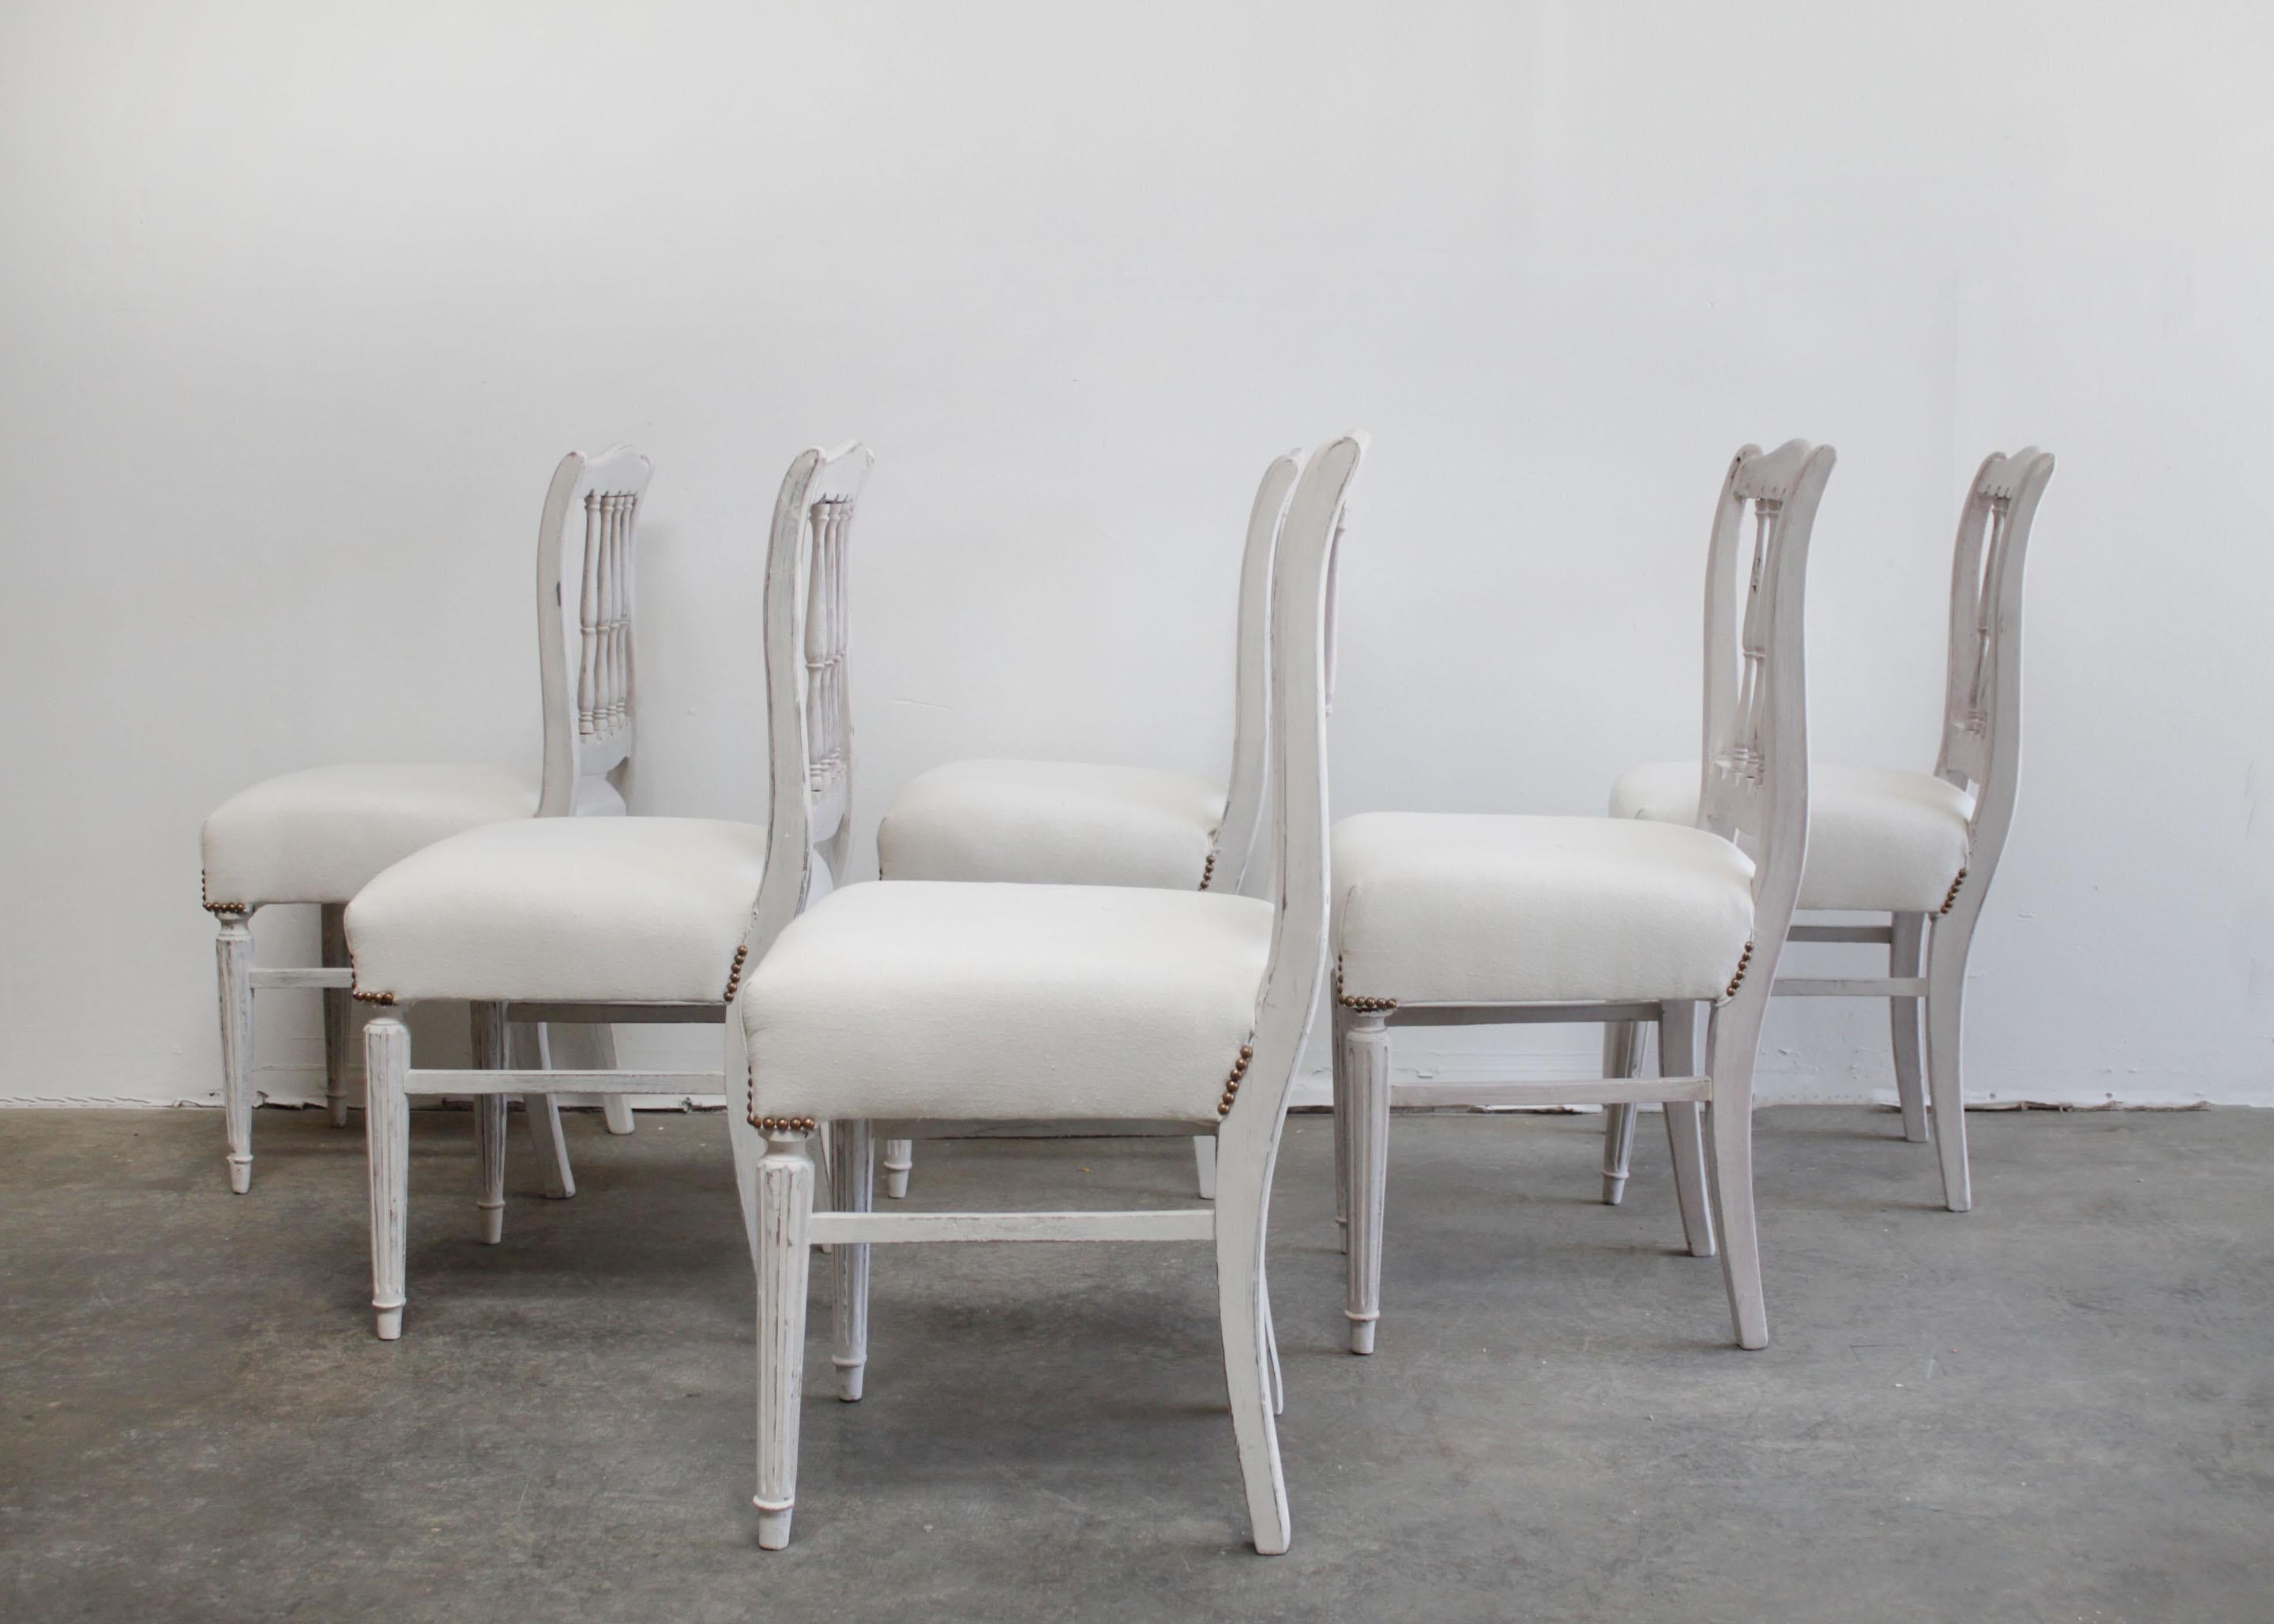 Beautiful vintage painted dining chairs with a spindle back.
Painted in a soft oyster gray, in multi tones, and subtle antique distressed edges.
Chairs are solid and sturdy, the seats are very comfortable.
Has a brass nail trim. We can upholster or